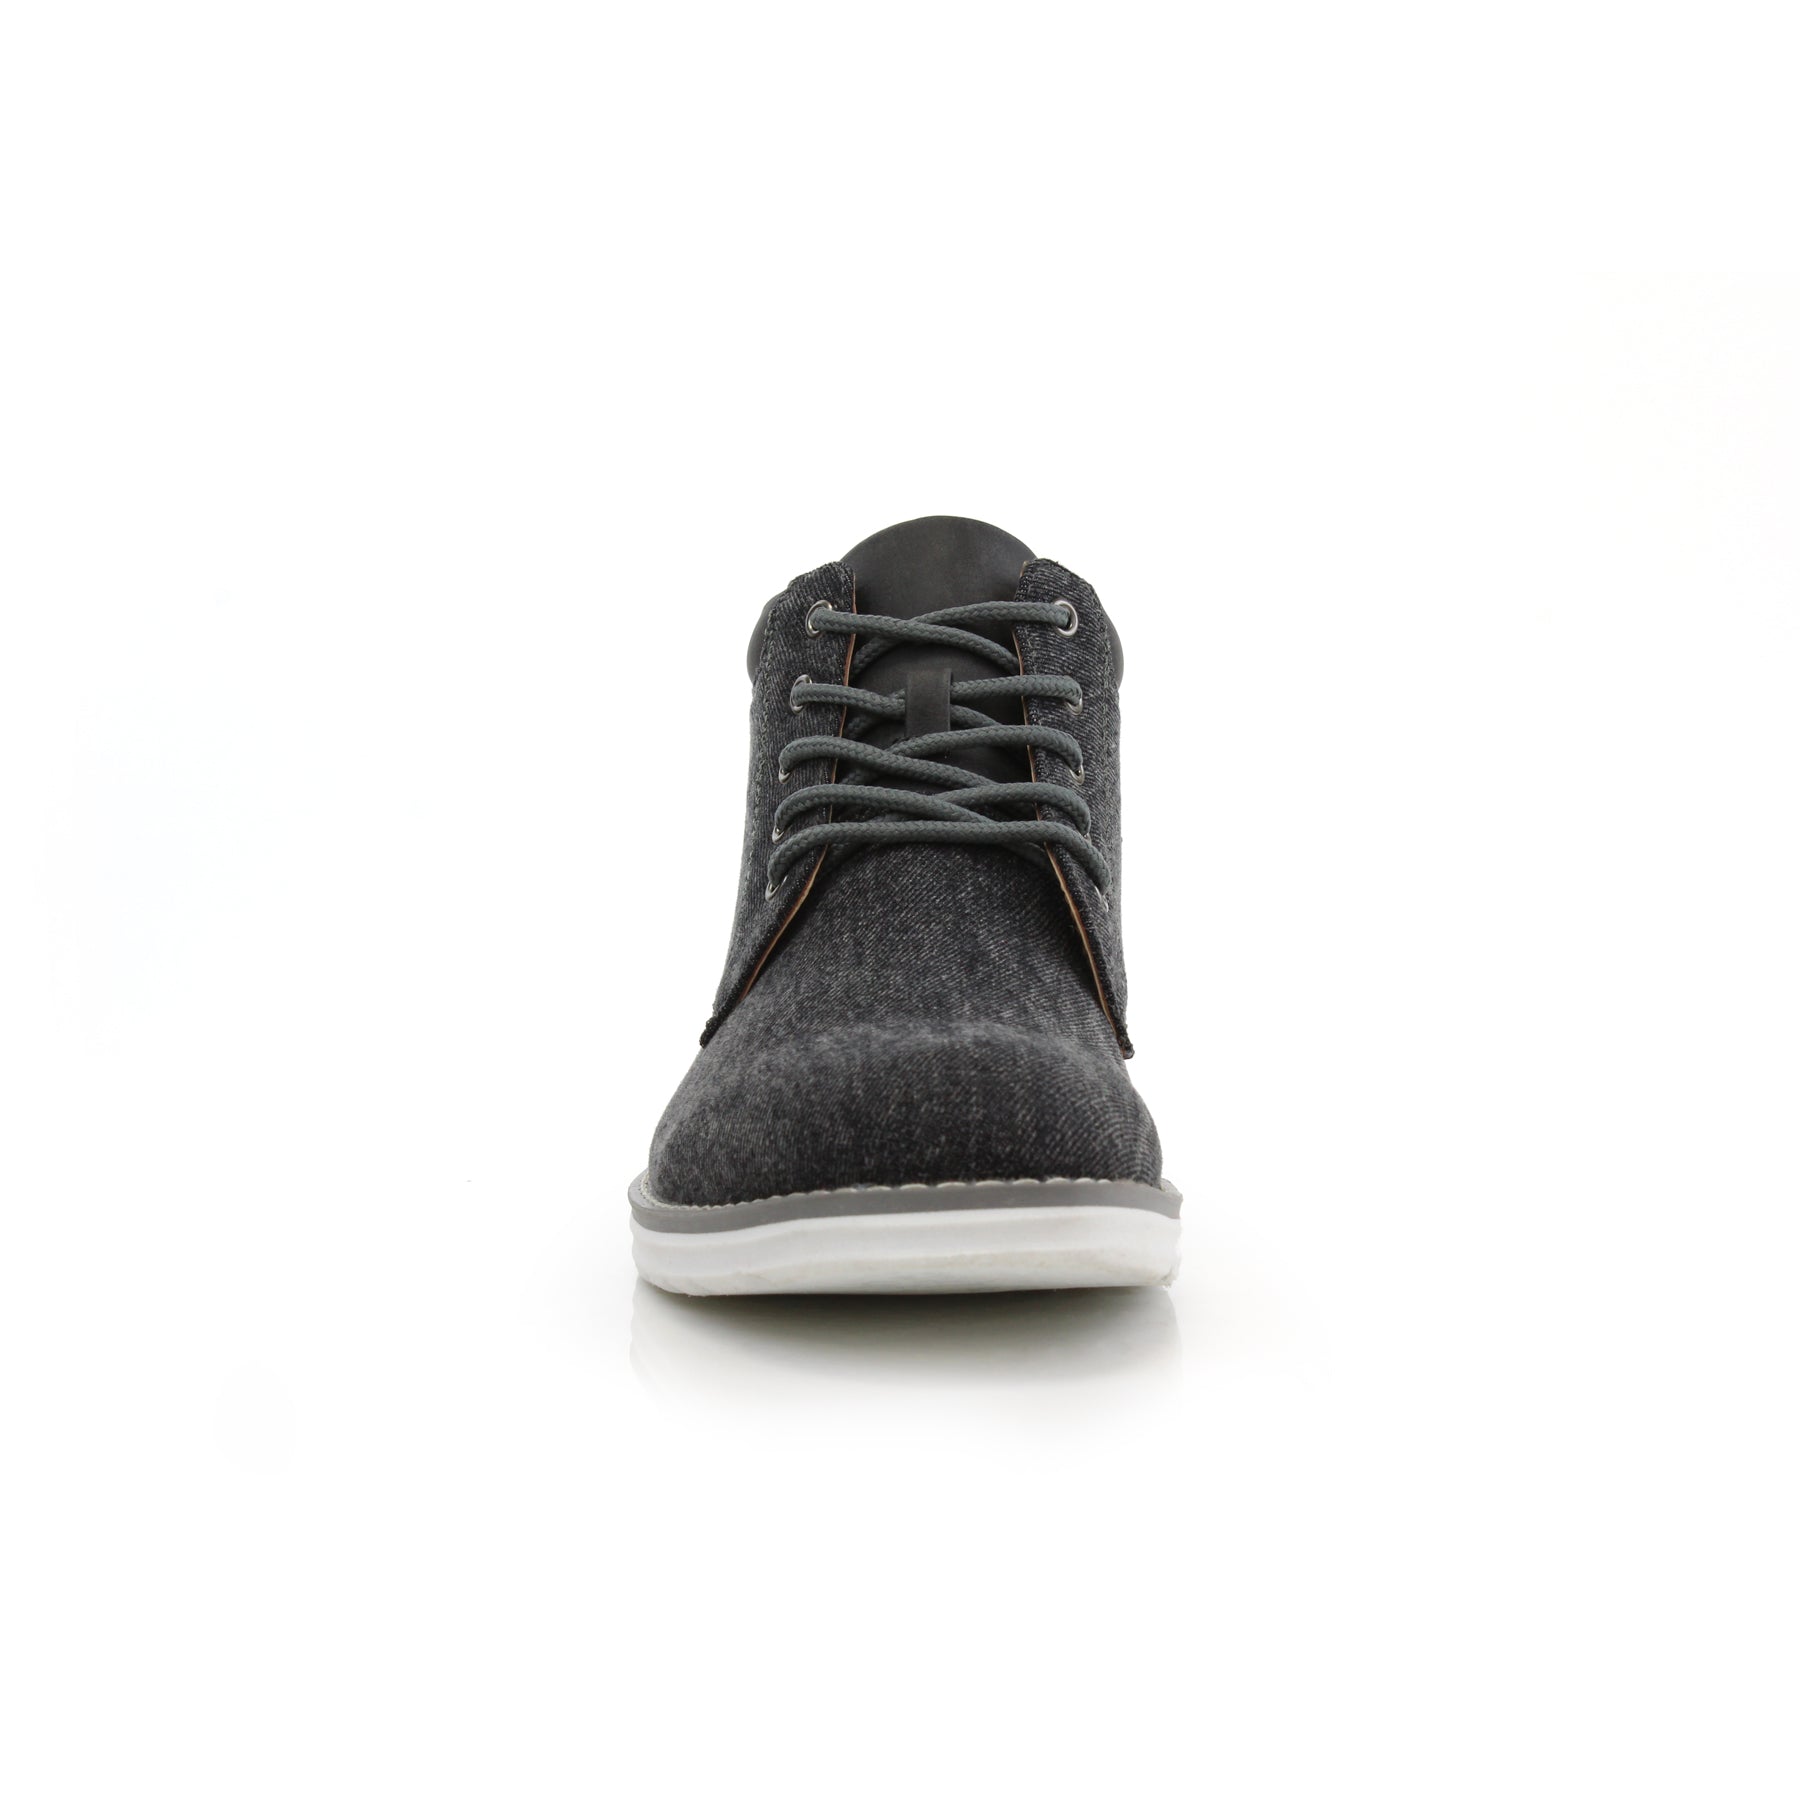 Denim Chukka Sneakers | Dustin by Polar Fox | Conal Footwear | Front Angle View